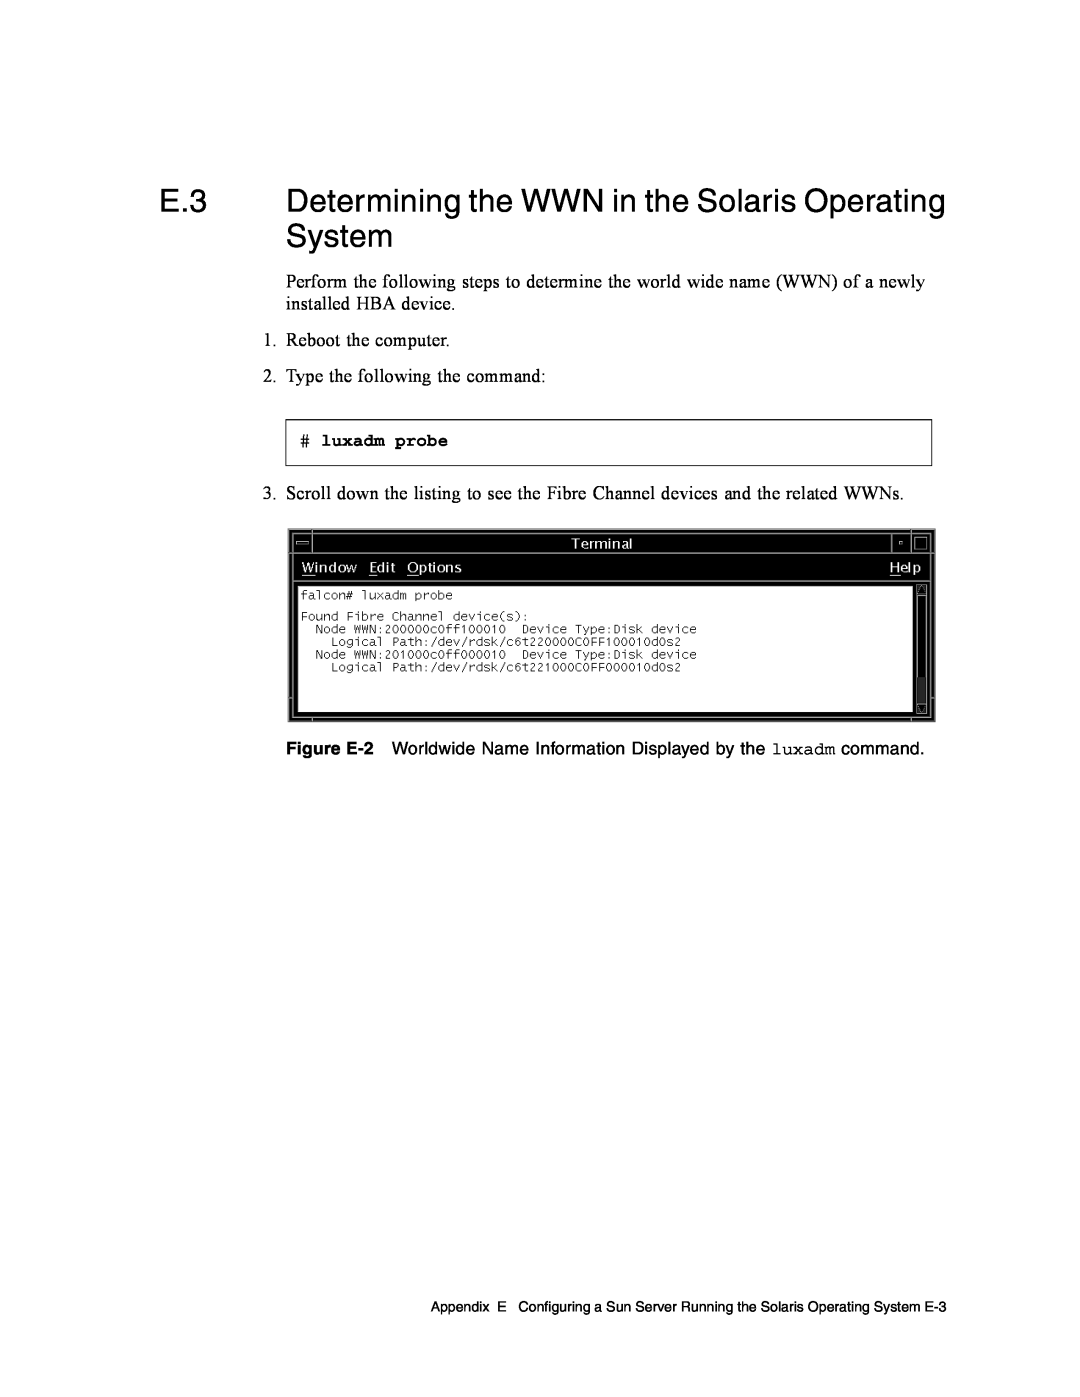 Dot Hill Systems II 200 FC service manual E.3 Determining the WWN in the Solaris Operating System 